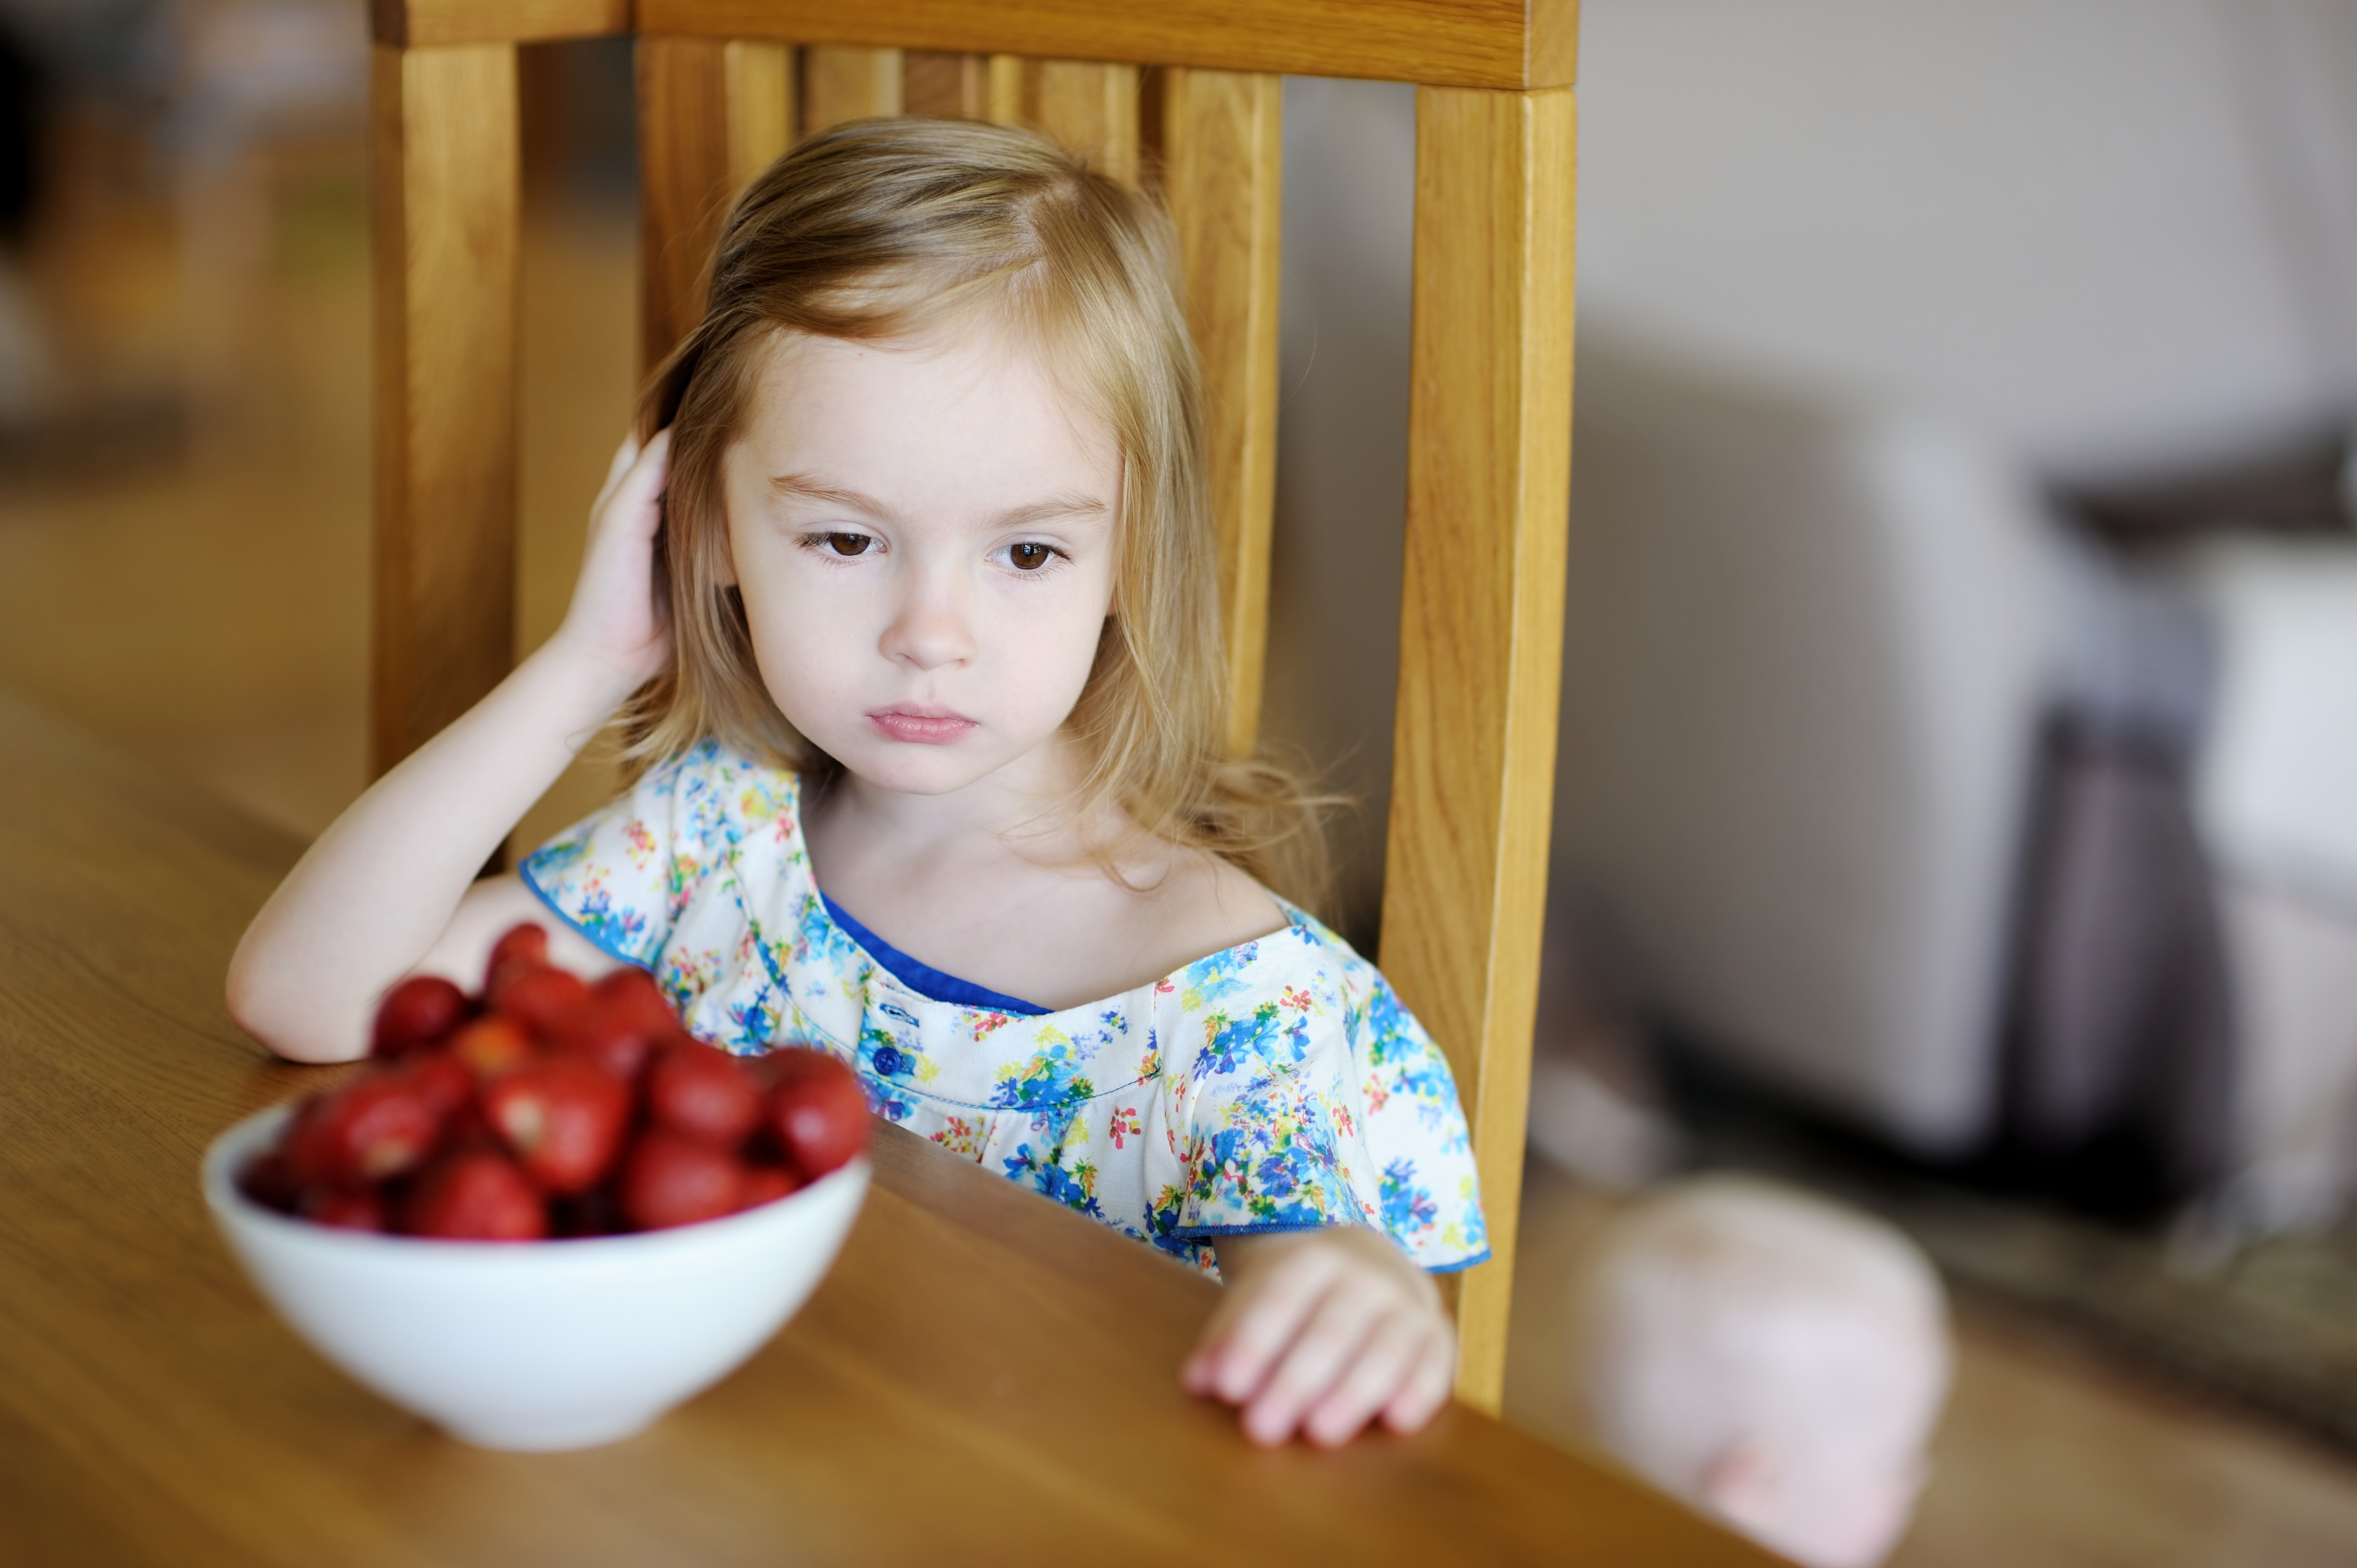 Little girl looking sad with a bowl of strawberries in front of her at the dining table | Source: Shutterstock